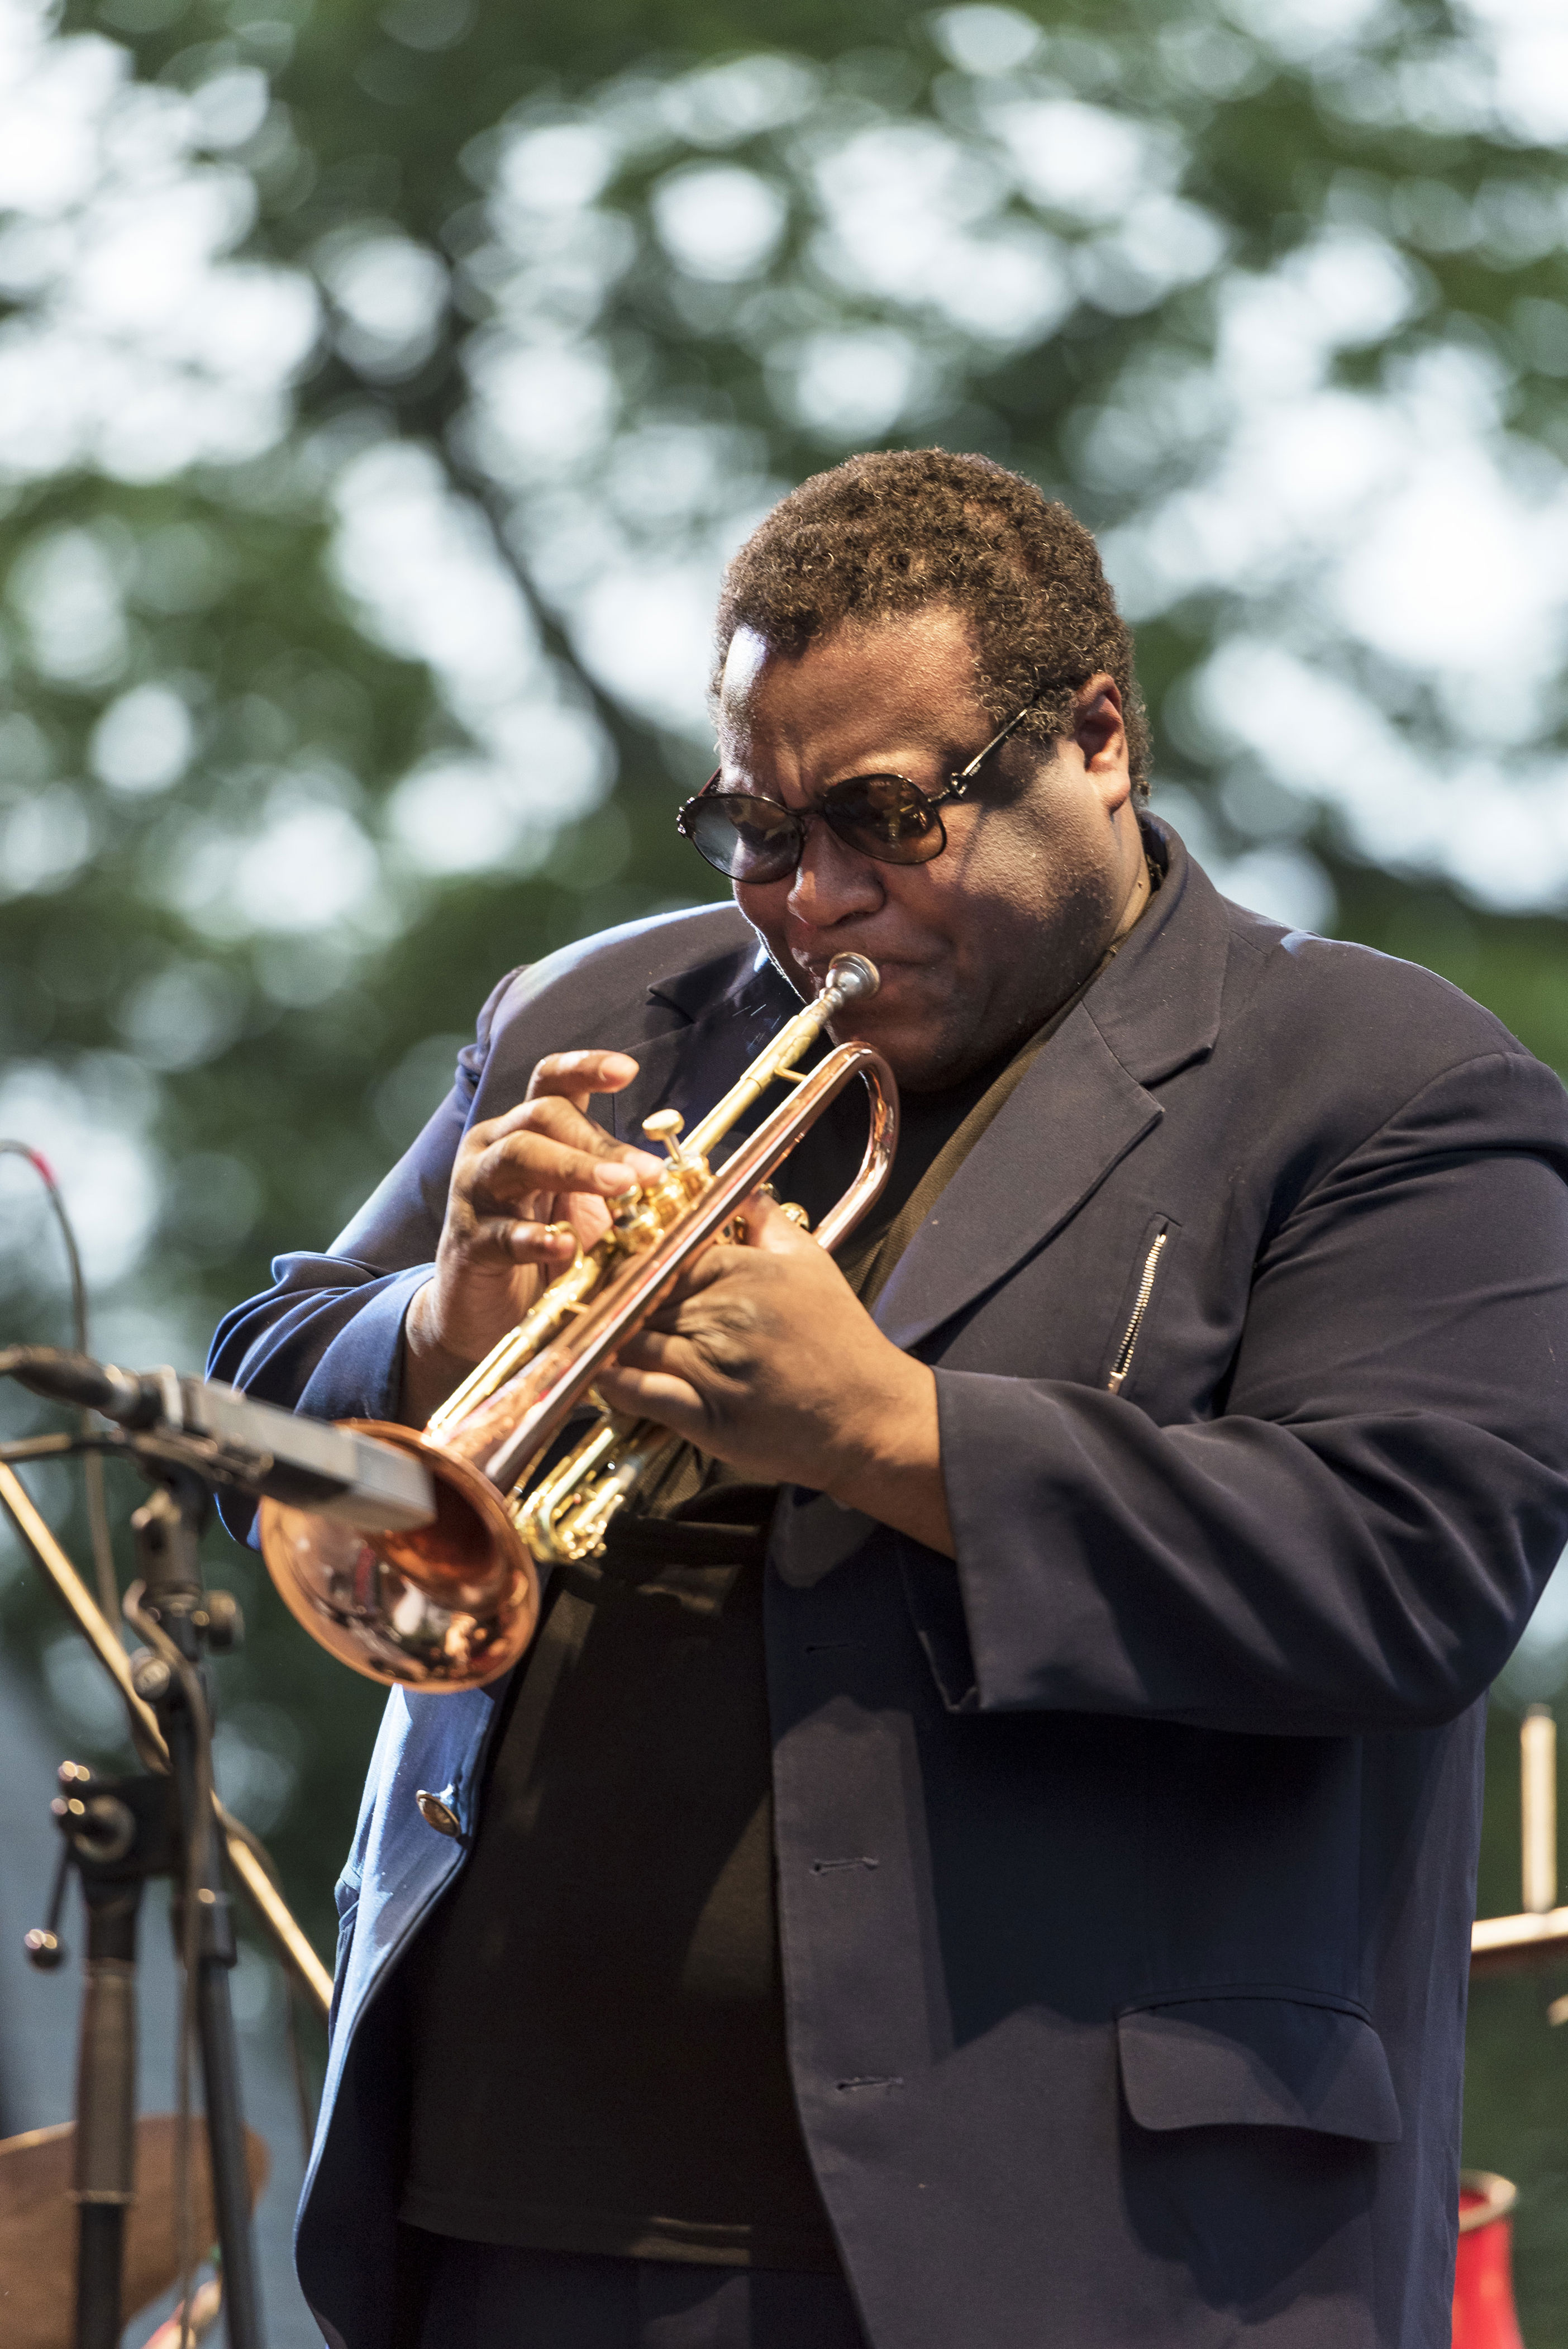 <p>Jazz trumpeter Wallace Roney passed away on March 31 from complications of COVID-19. He was 59. The Grammy winner famously studied with Miles Davis from 1985 until the acclaimed musician's death in 1991. Philadelphia-born Wallace's albums include "Verses," "Obsession" and "No Room for Argument."</p>